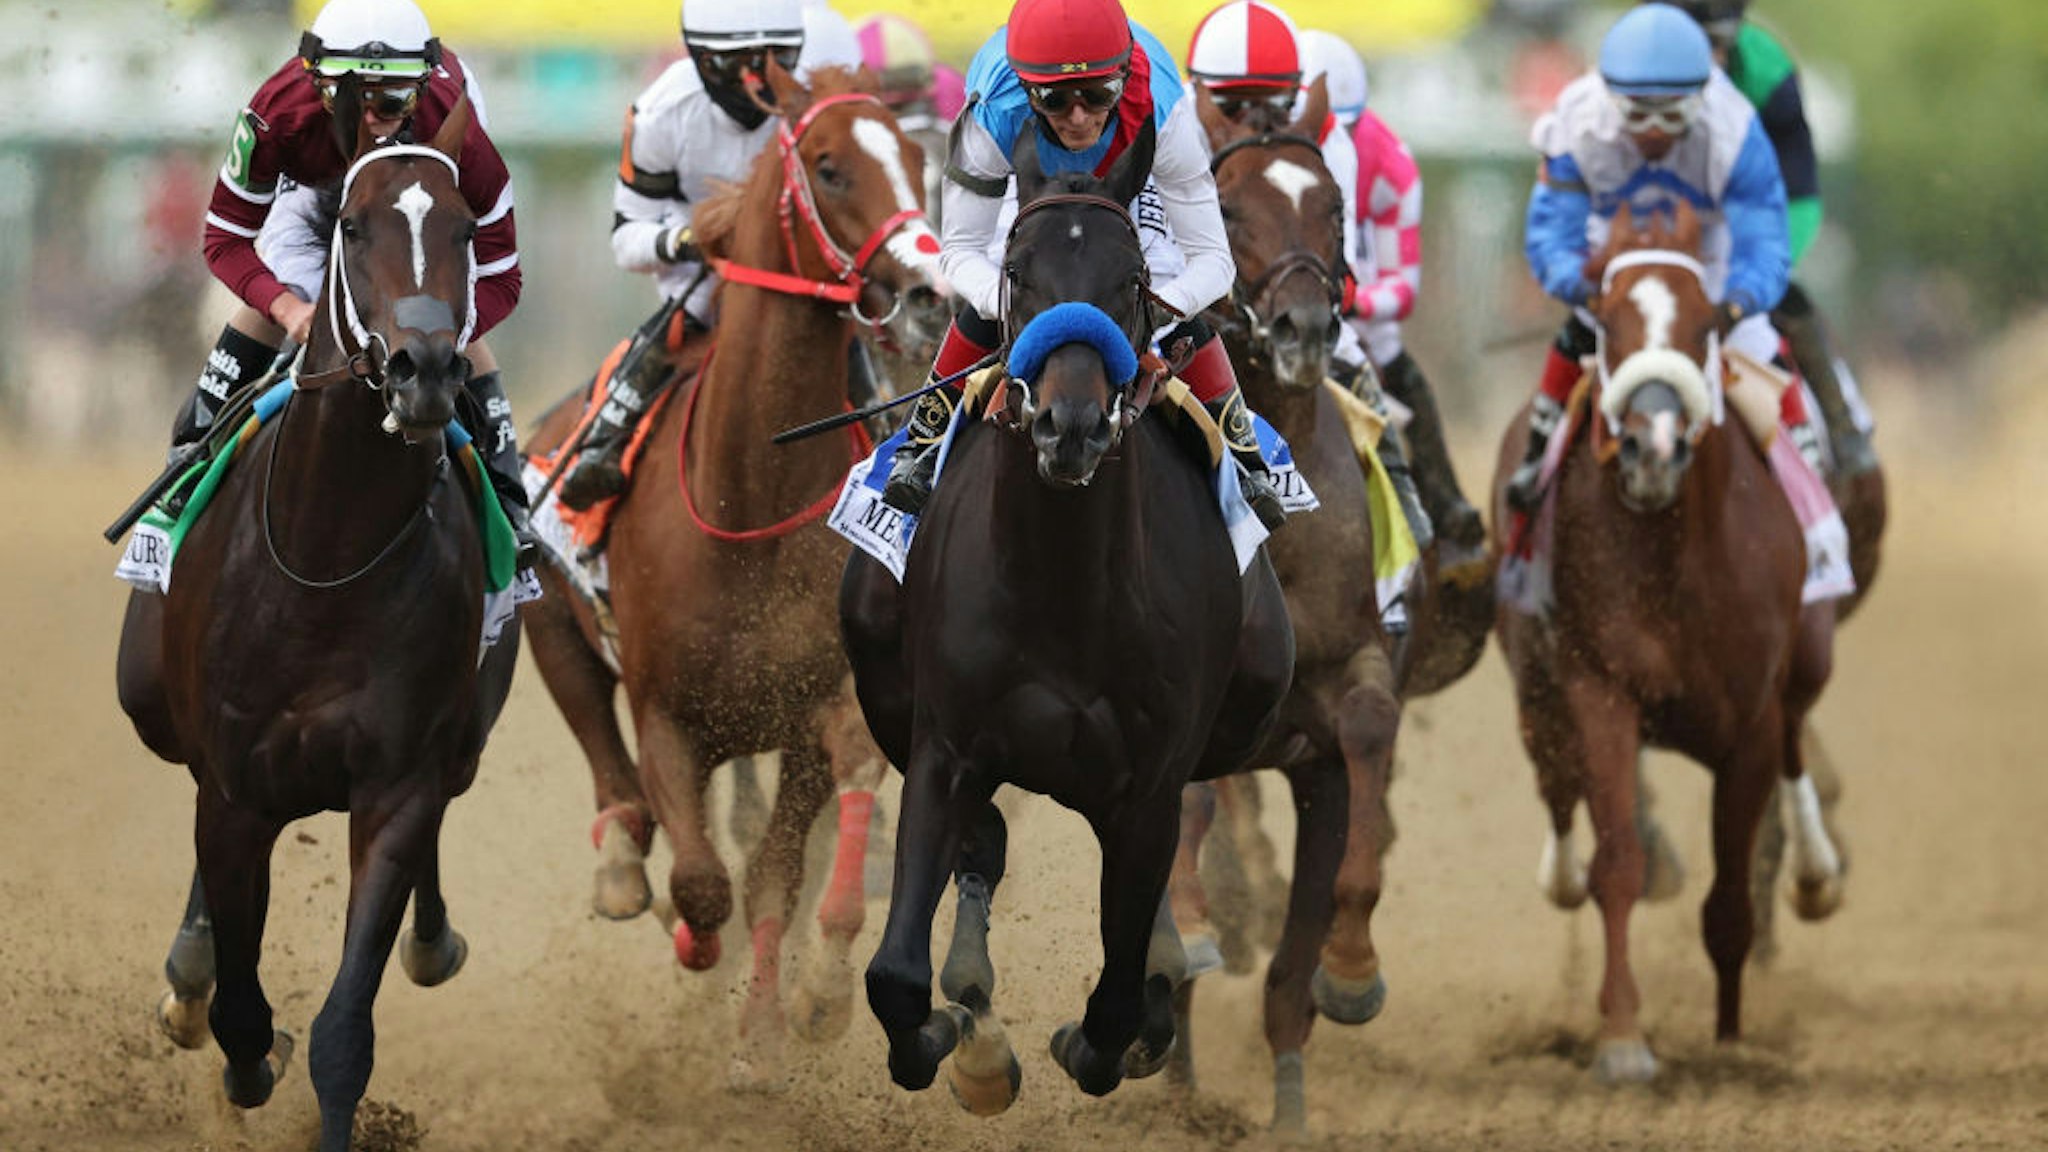 BALTIMORE, MARYLAND - MAY 15: Jockey John Velazquez #3 riding Medina Spirit leads the field in the first pass during the 146th Running of the Preakness Stakes at Pimlico Race Course on May 15, 2021 in Baltimore, Maryland. (Photo by Patrick Smith/Getty Images)